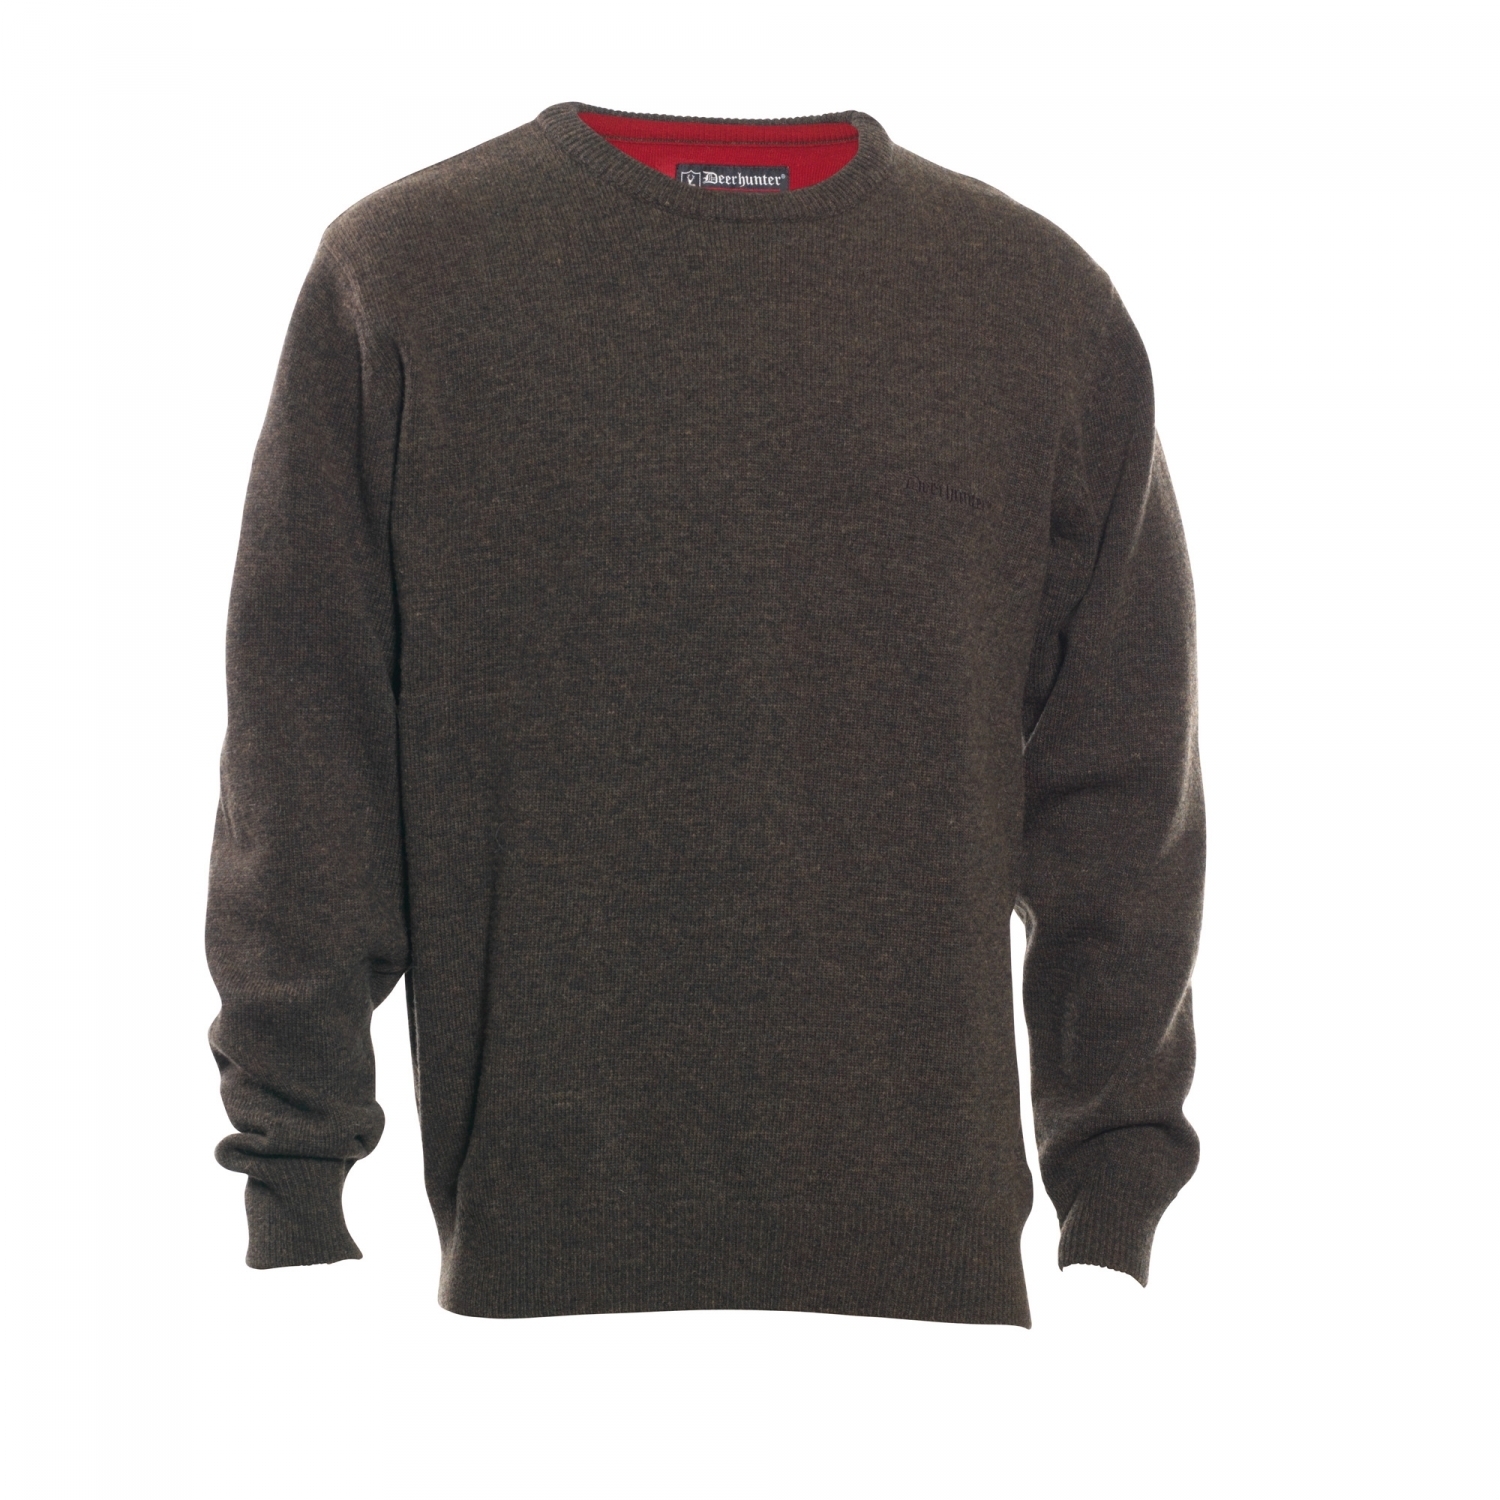 Hastings Knit O-neck 383 M